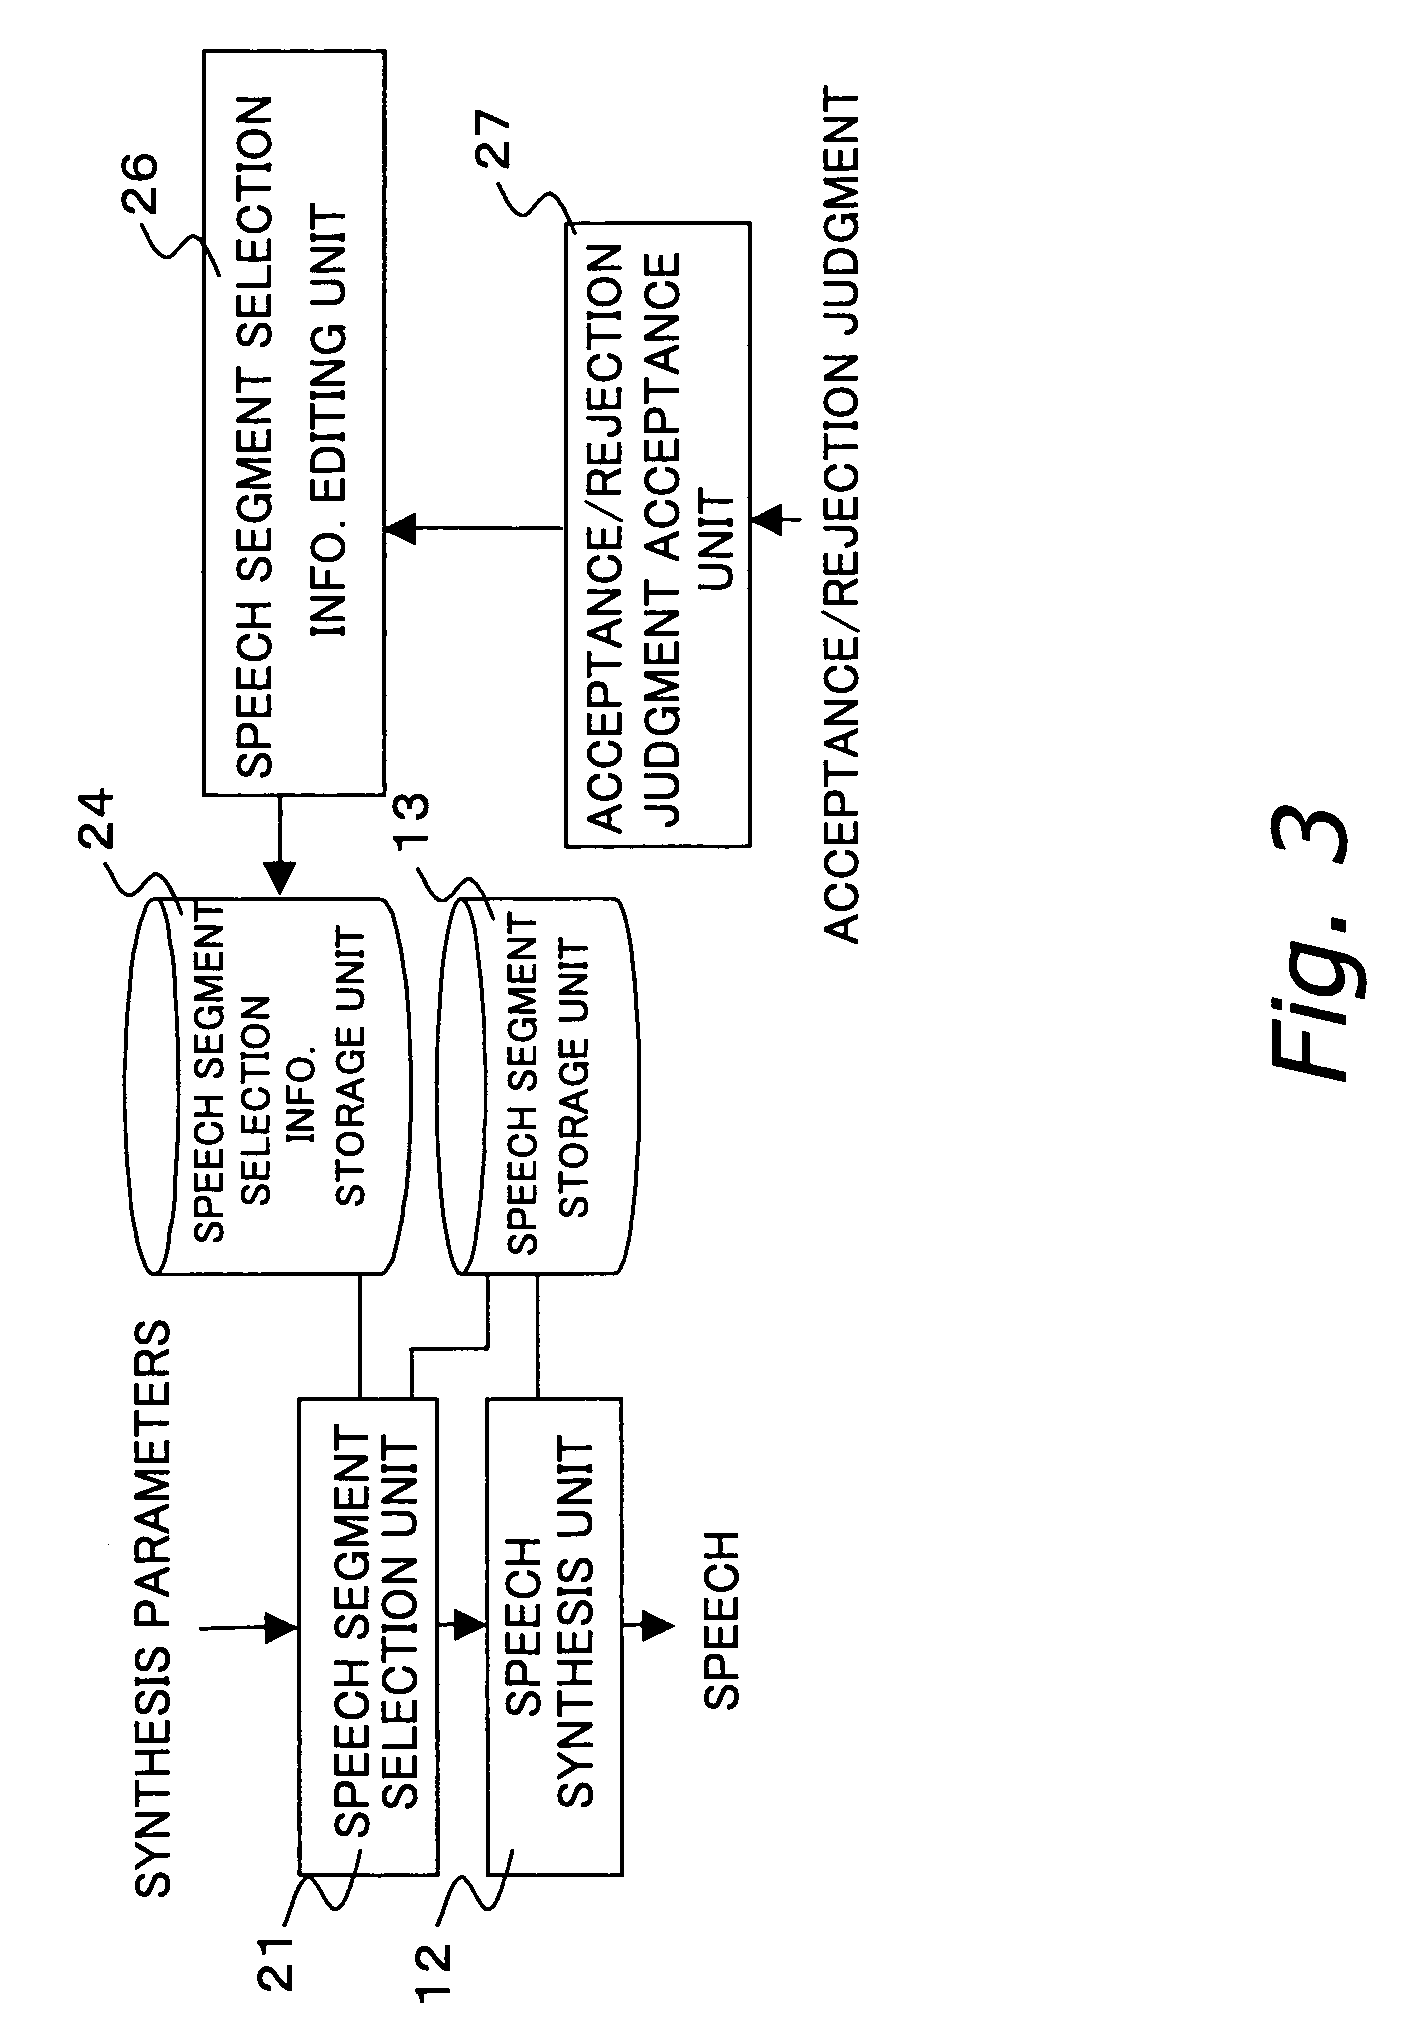 Speech synthesis system